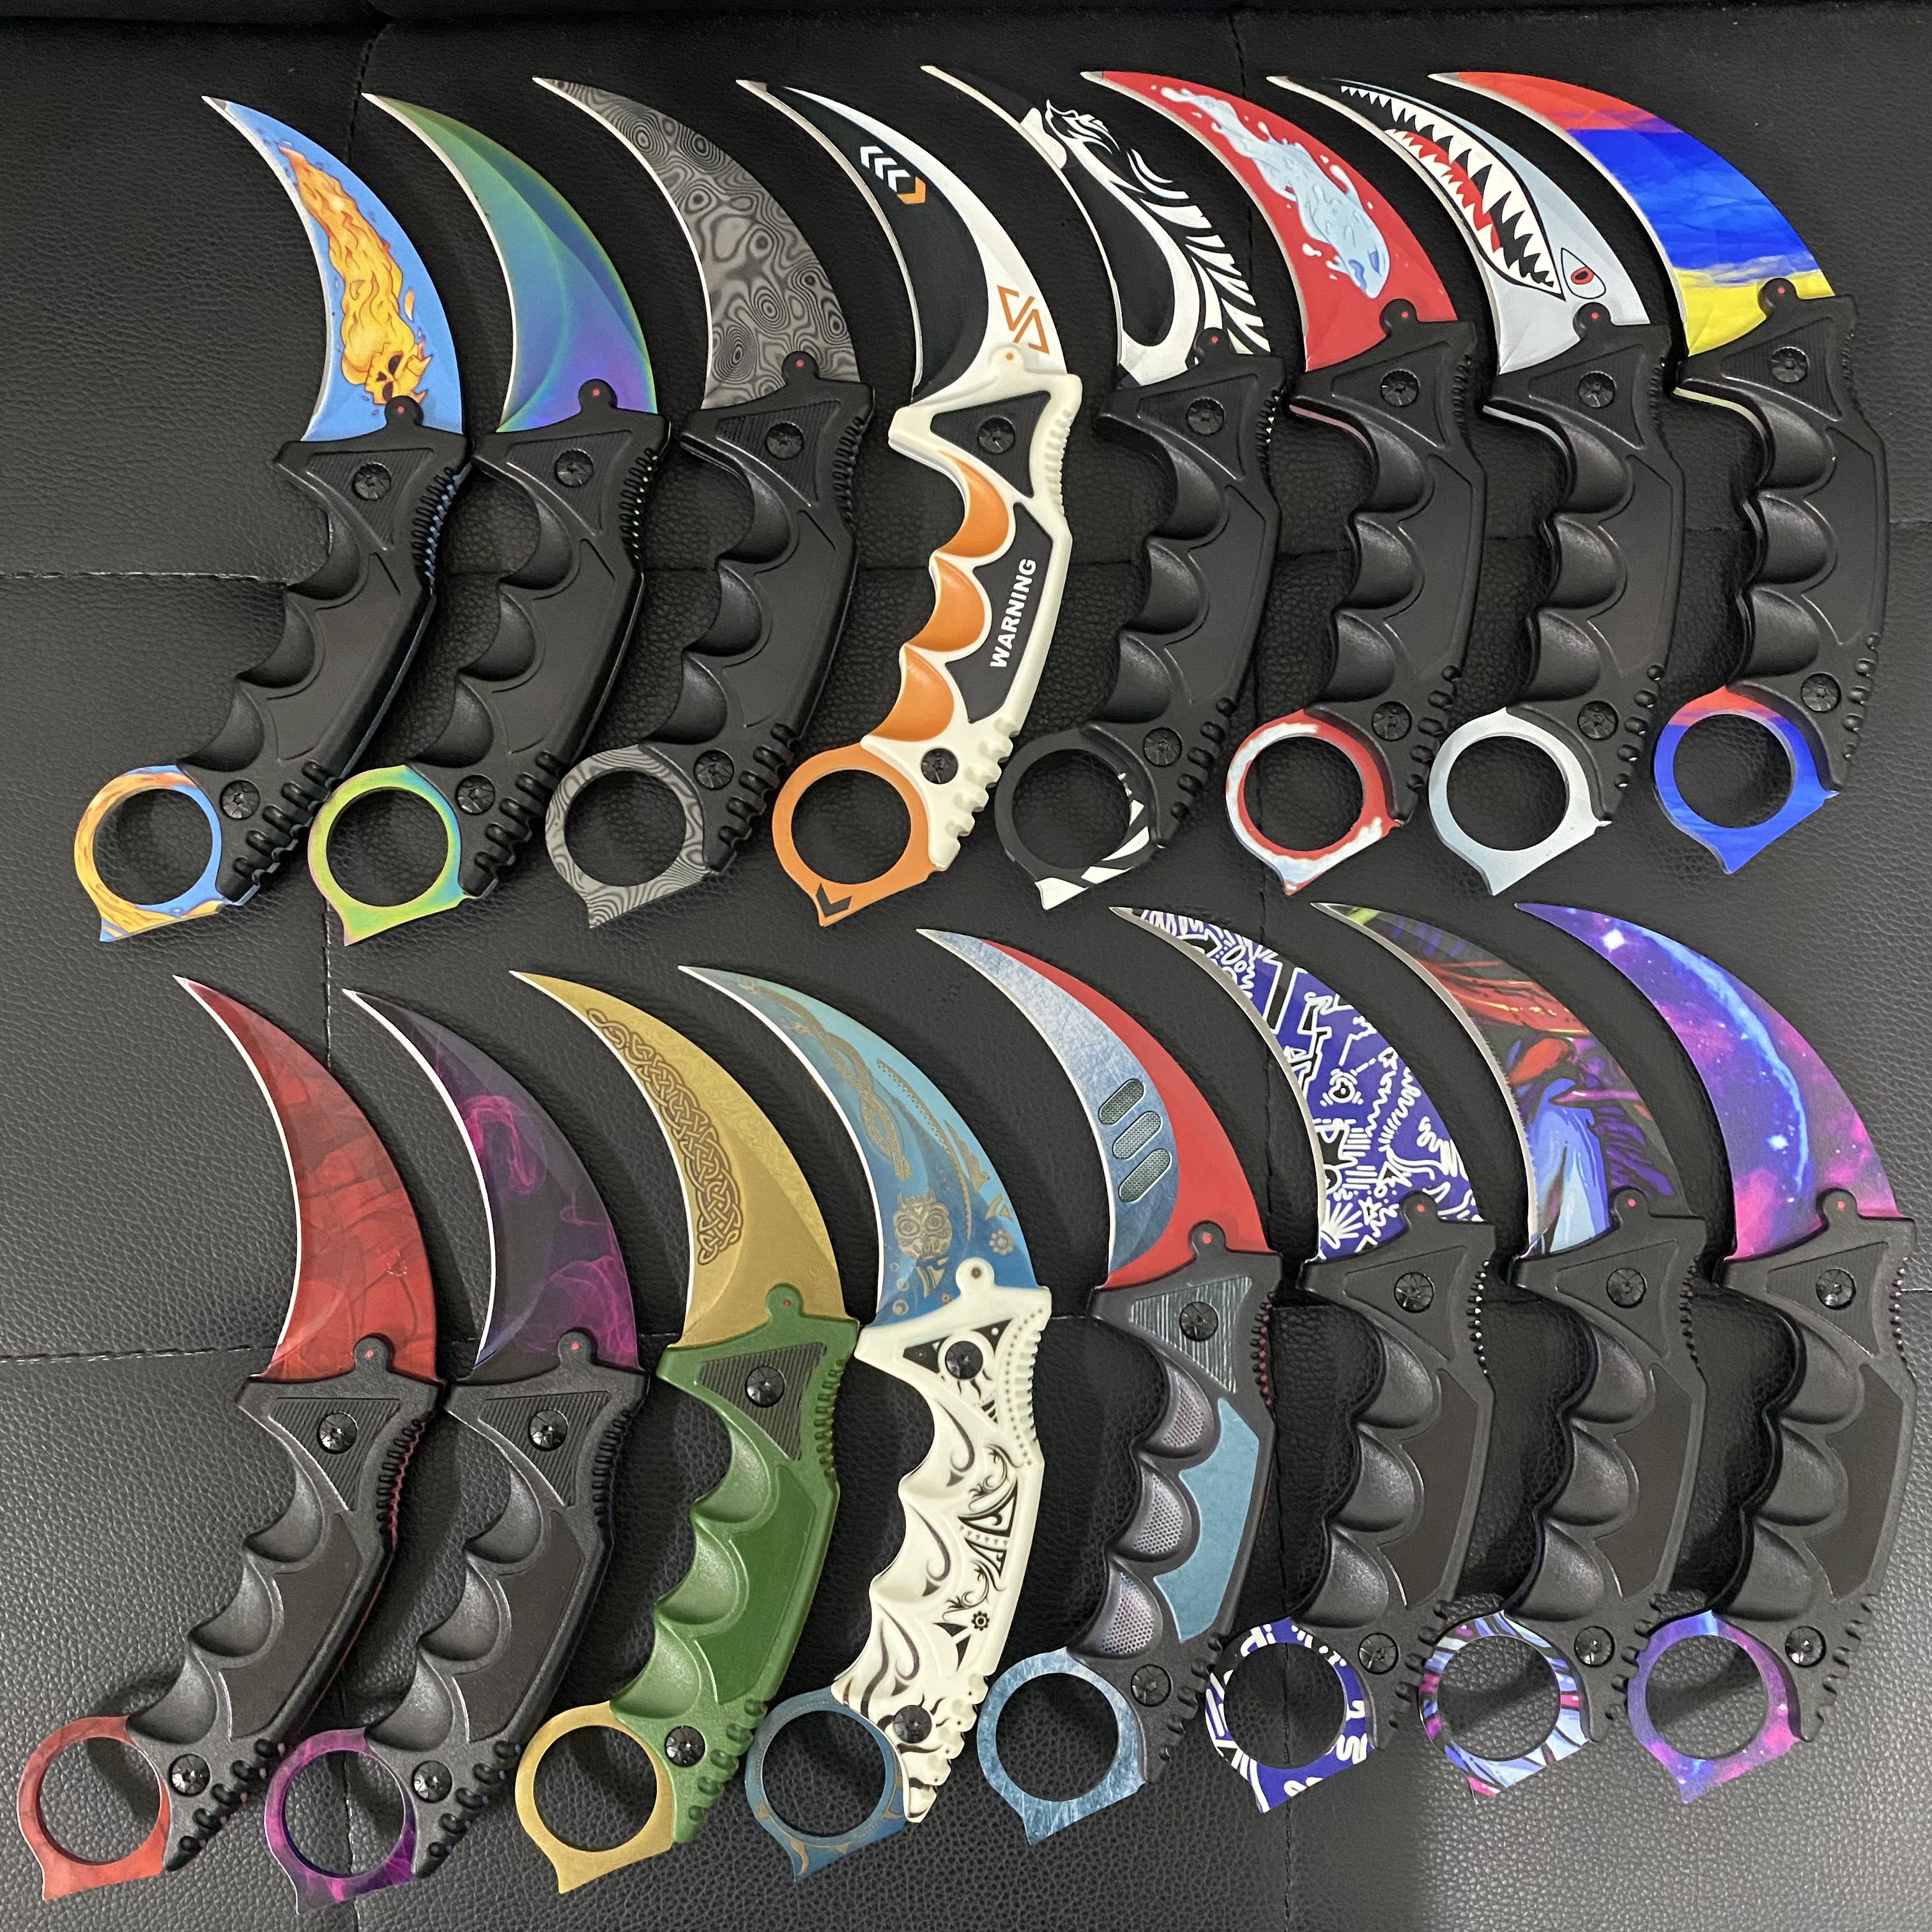 

Fulltang Cs go Karambit Knife Hunting Camping Pocket Knife Survival Tactical Outdoor Fixed Blade Claw Knives Counter Strike Gamma Doppler bowie huntsman knifes